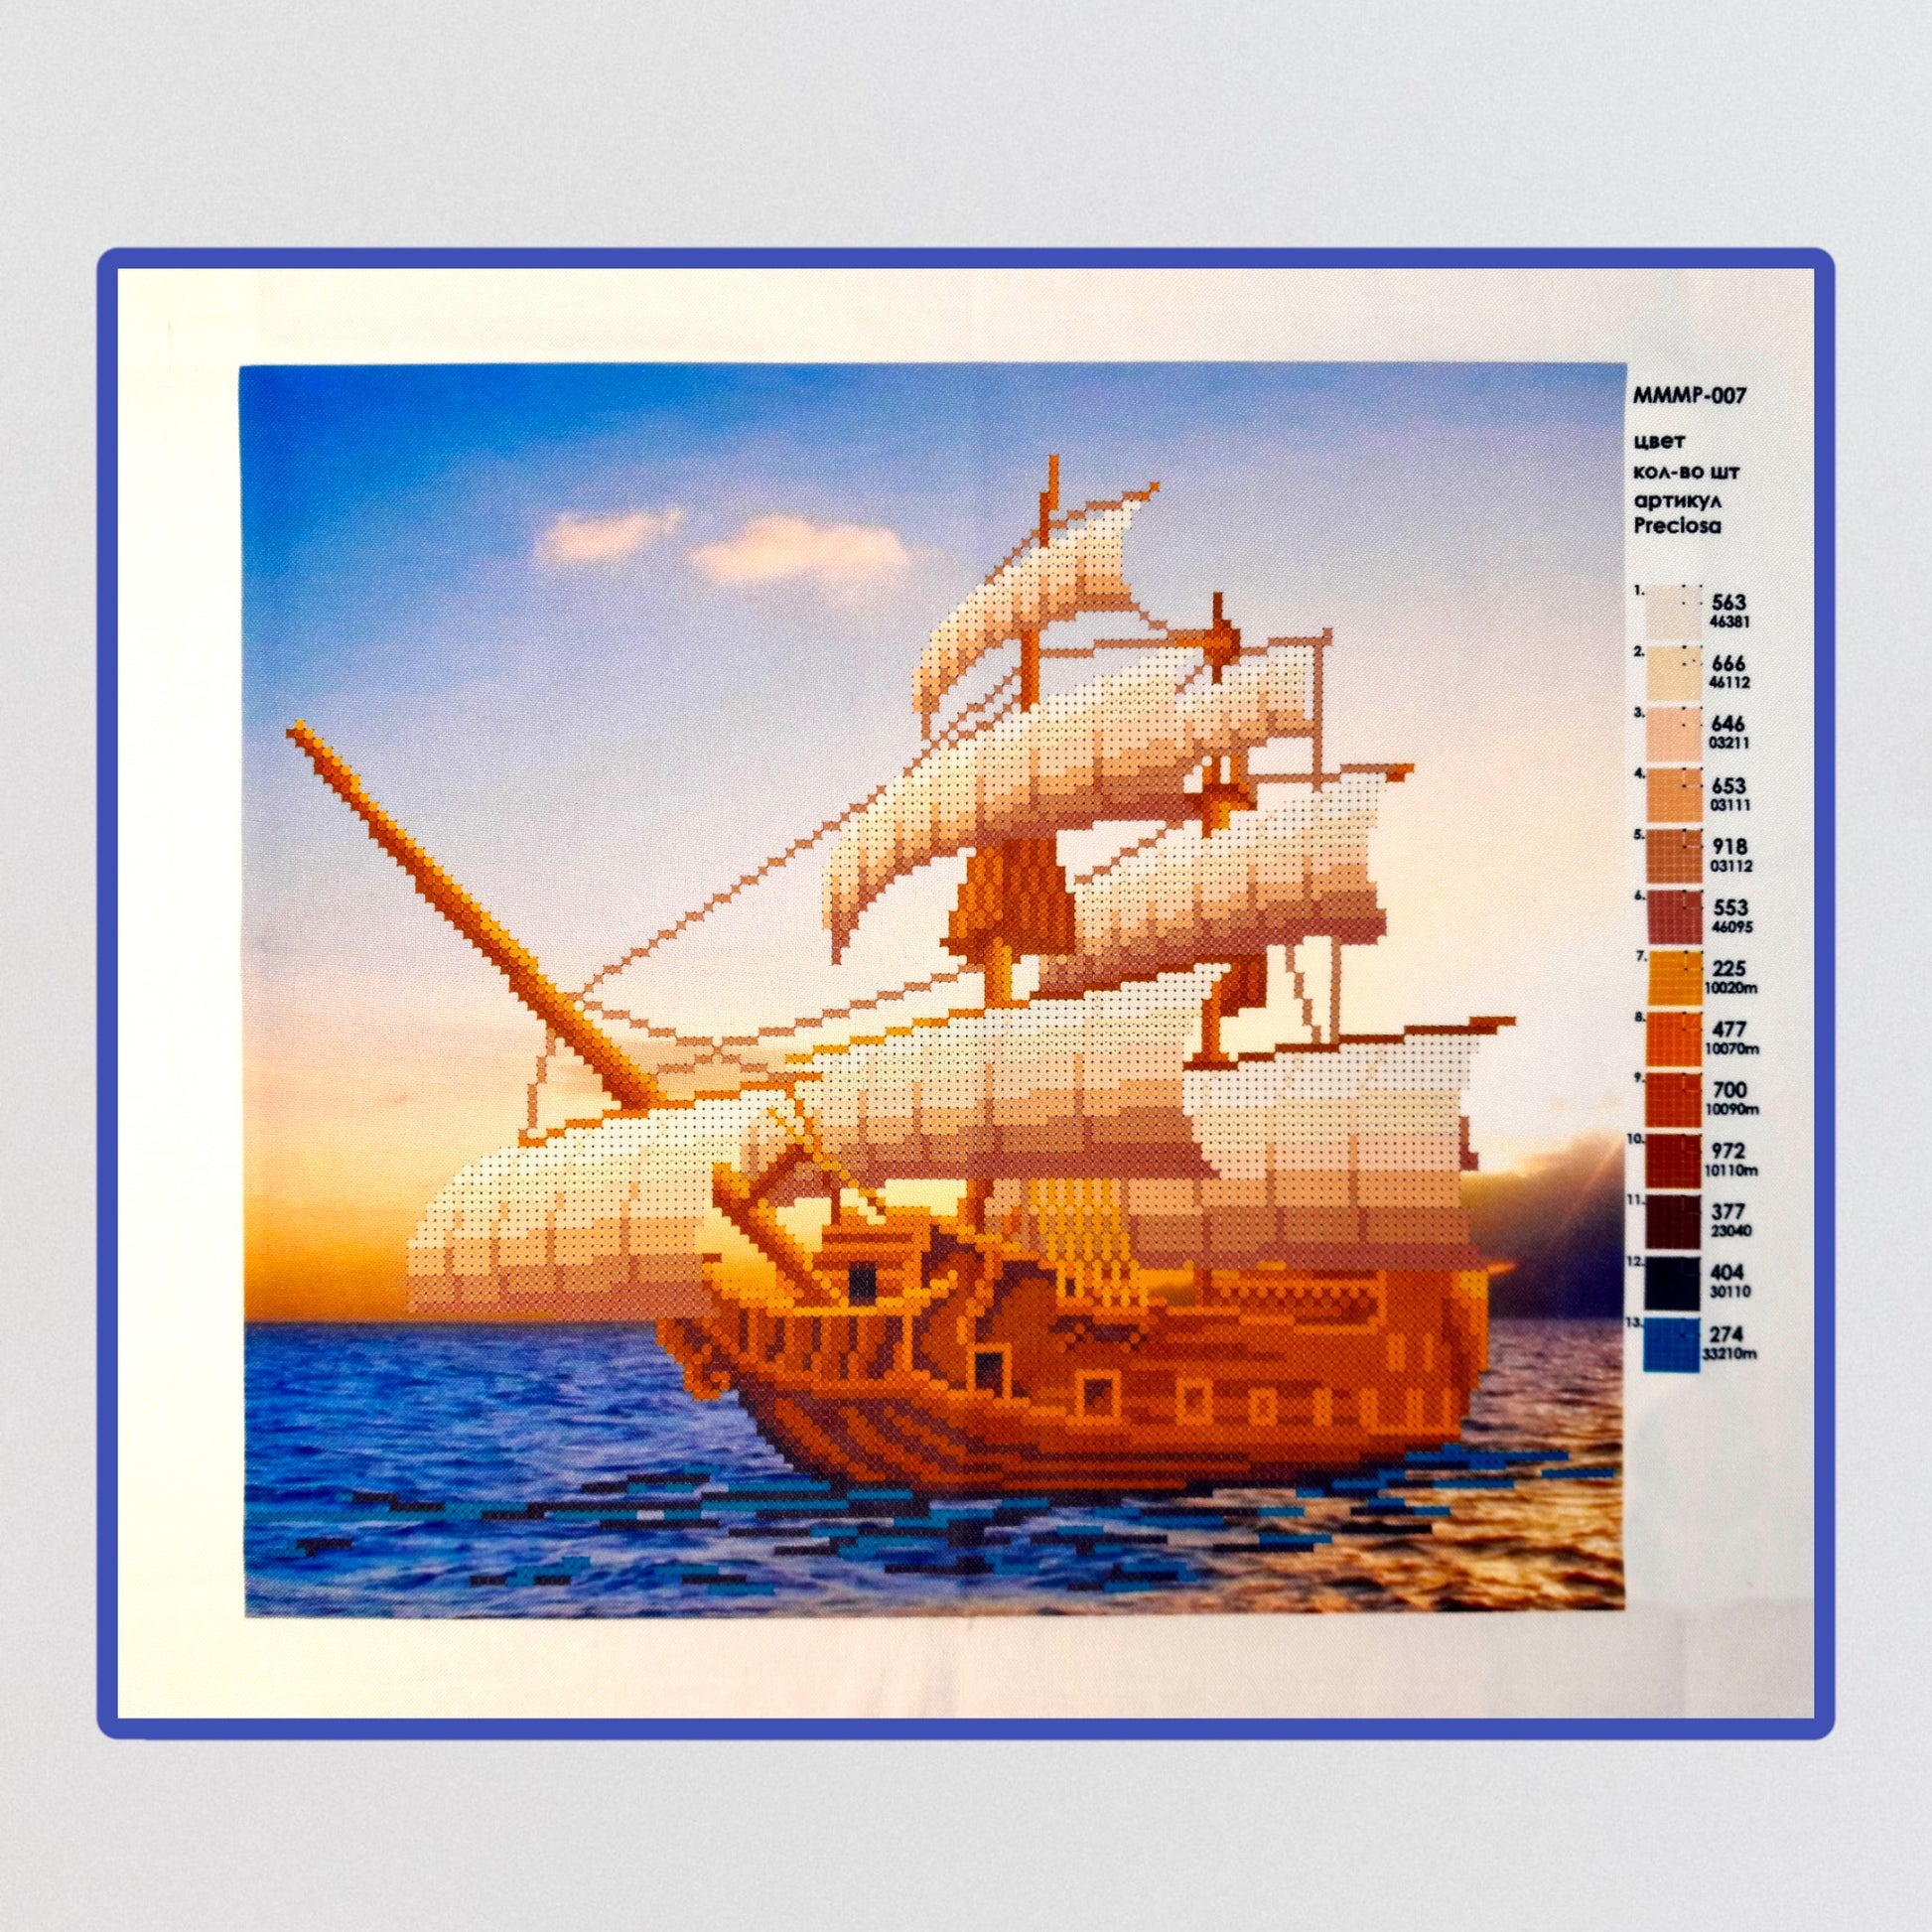 DIY Bead embroidery kit "Favourable wind''. Size: 11.4-12.6 in (29-32cm) - VadymShop